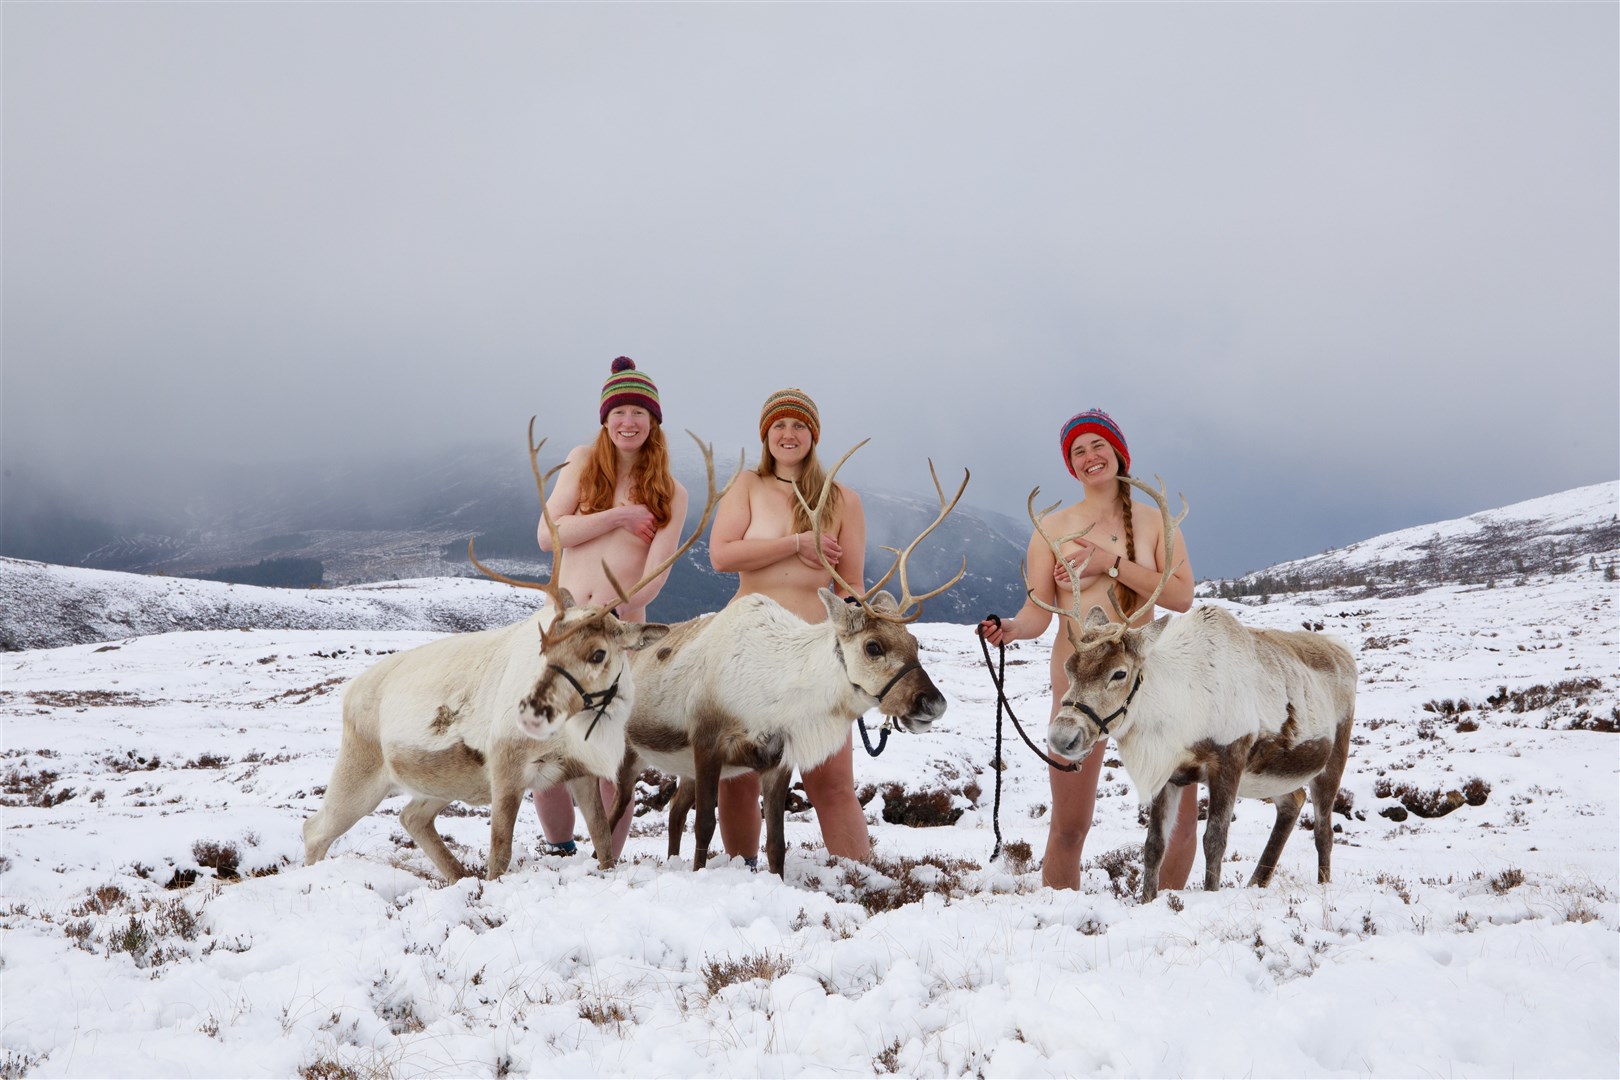 Chlling out in the Cairngorms are Ruth, Fiona and Lotti. The reindeer centre kindly requested that full names were not used in the article.